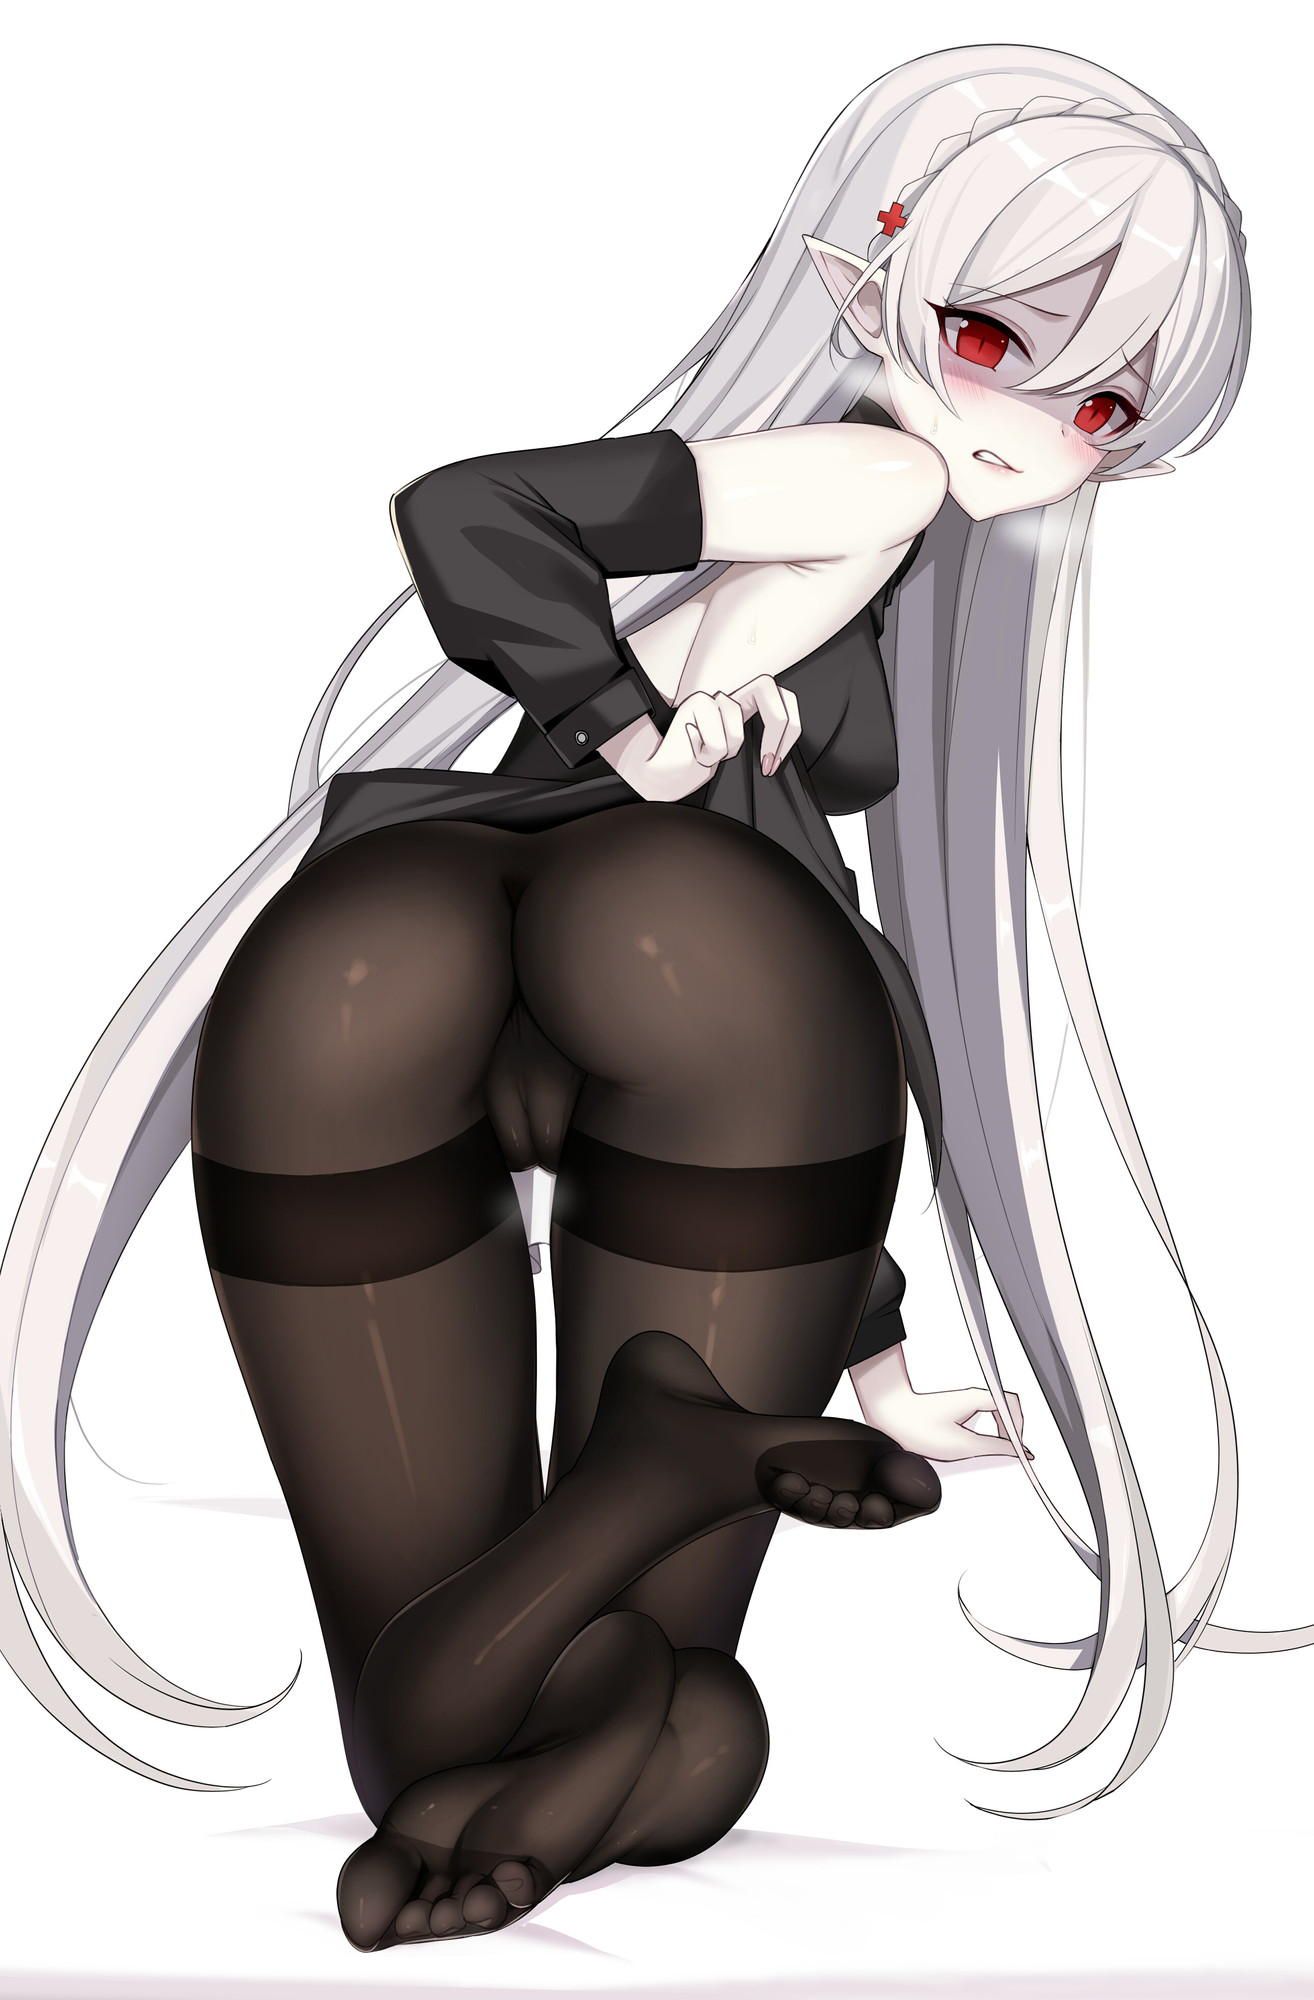 "E-hee..." ♡" stockings and sheer bread through tights... Not Man... The girl who shows ♪ 12